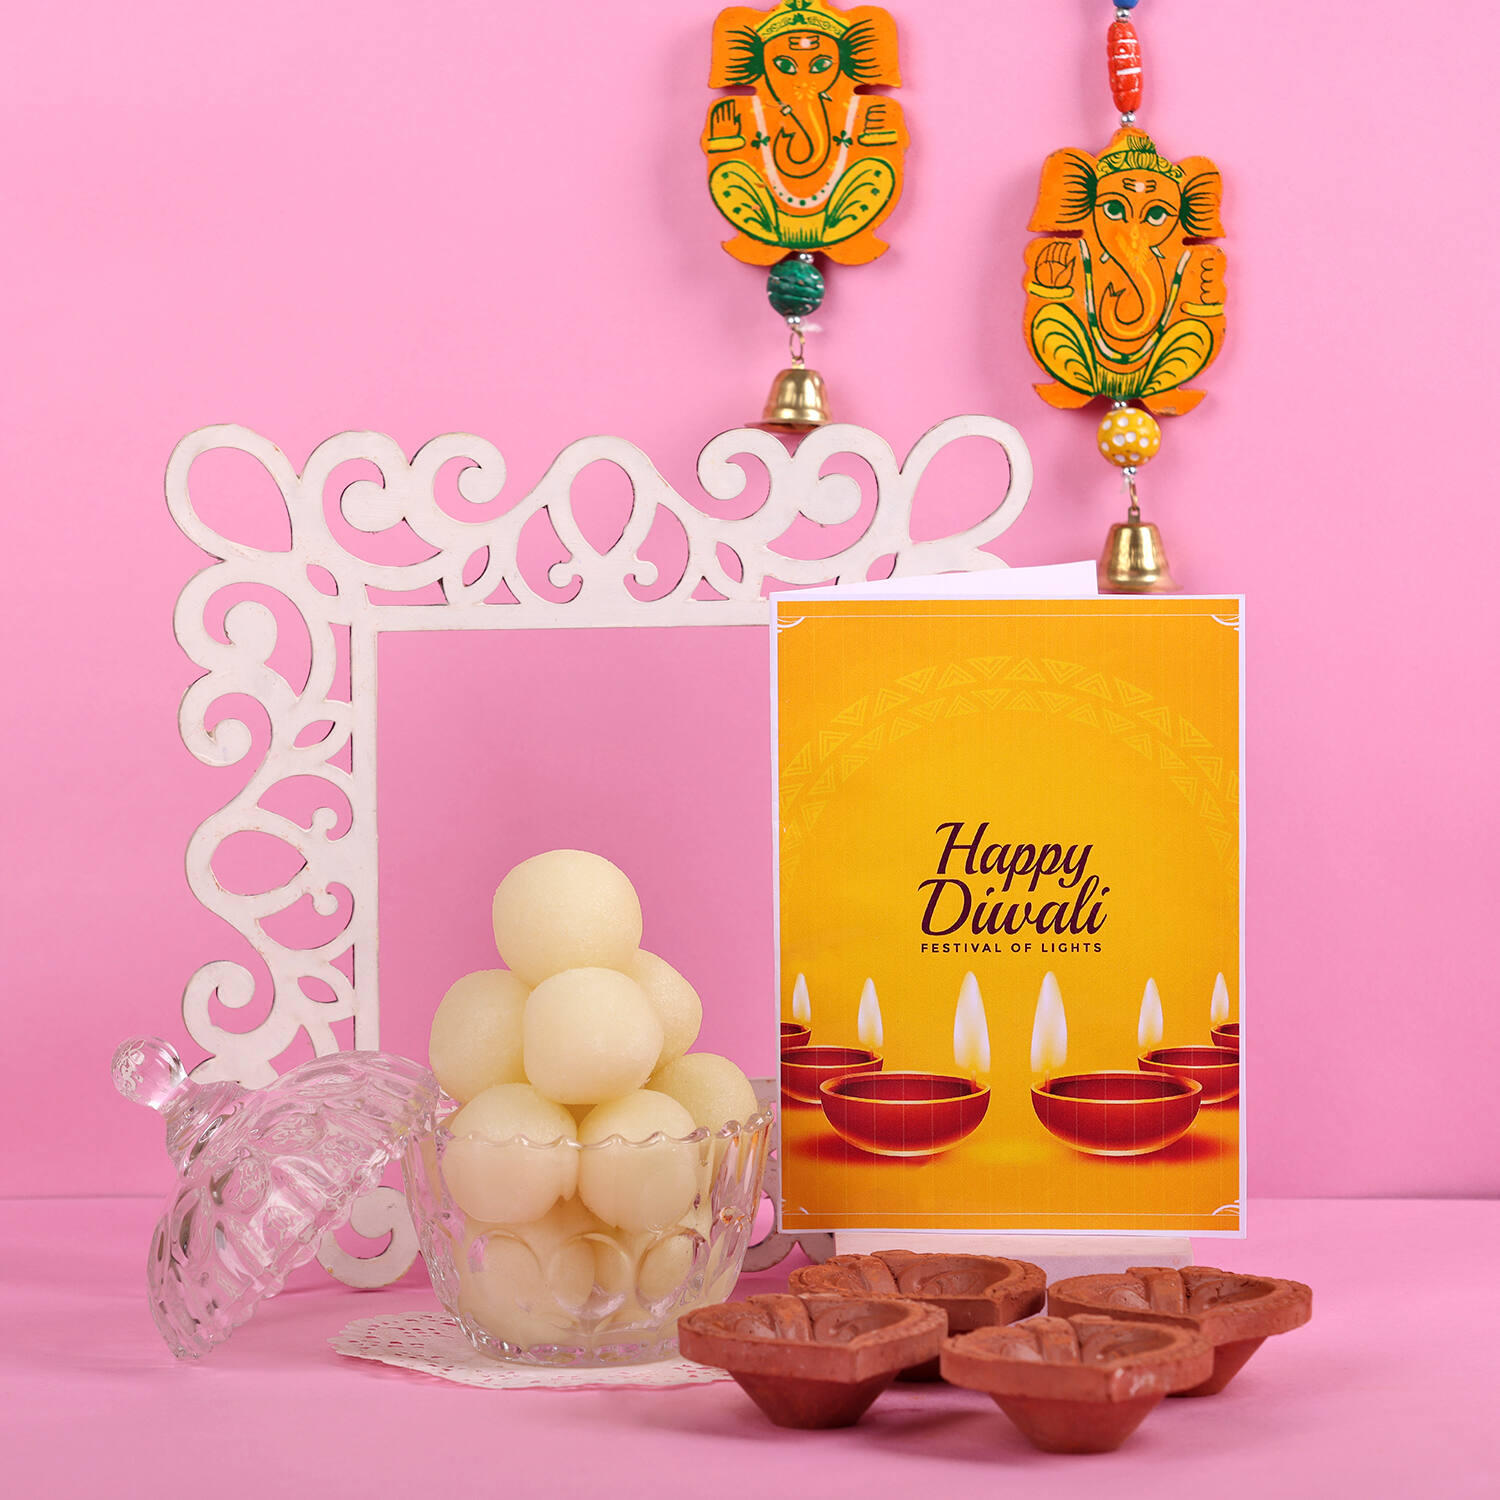 Sweet And Savoury Treats Diwali Hamper - IGP Gifts, Indian Gifts Portal,  Send Online Gifts, Order Online Gifts, Online Gift Store, Gifts Delivery  Online | Shopping from Microsoft Start